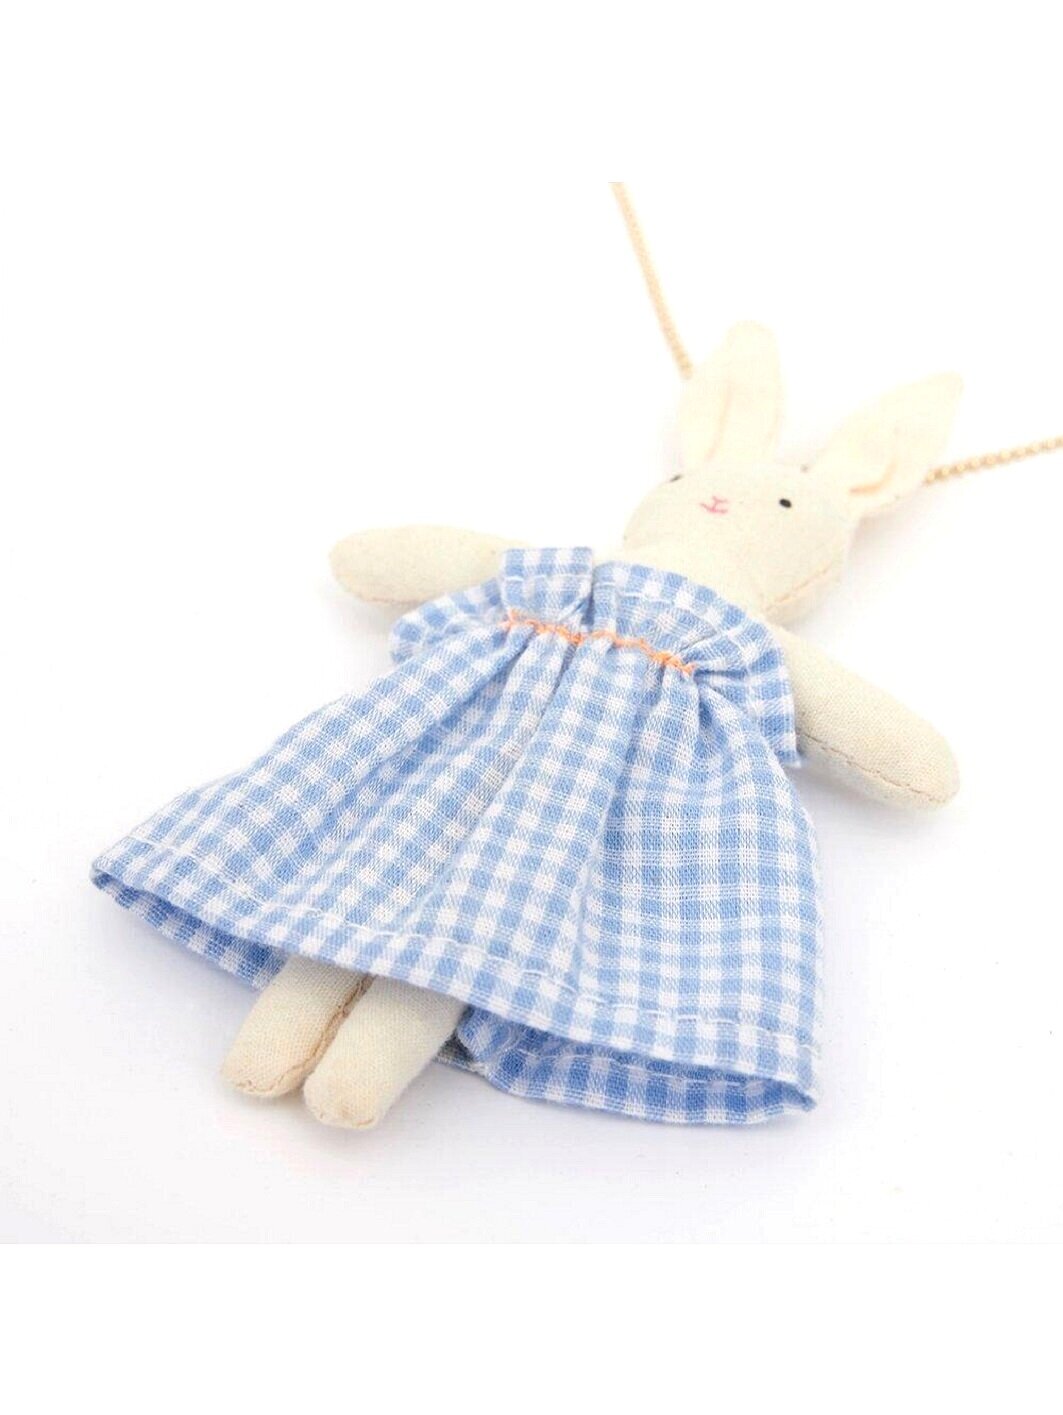 Bunny Doll necklace in blue check dress